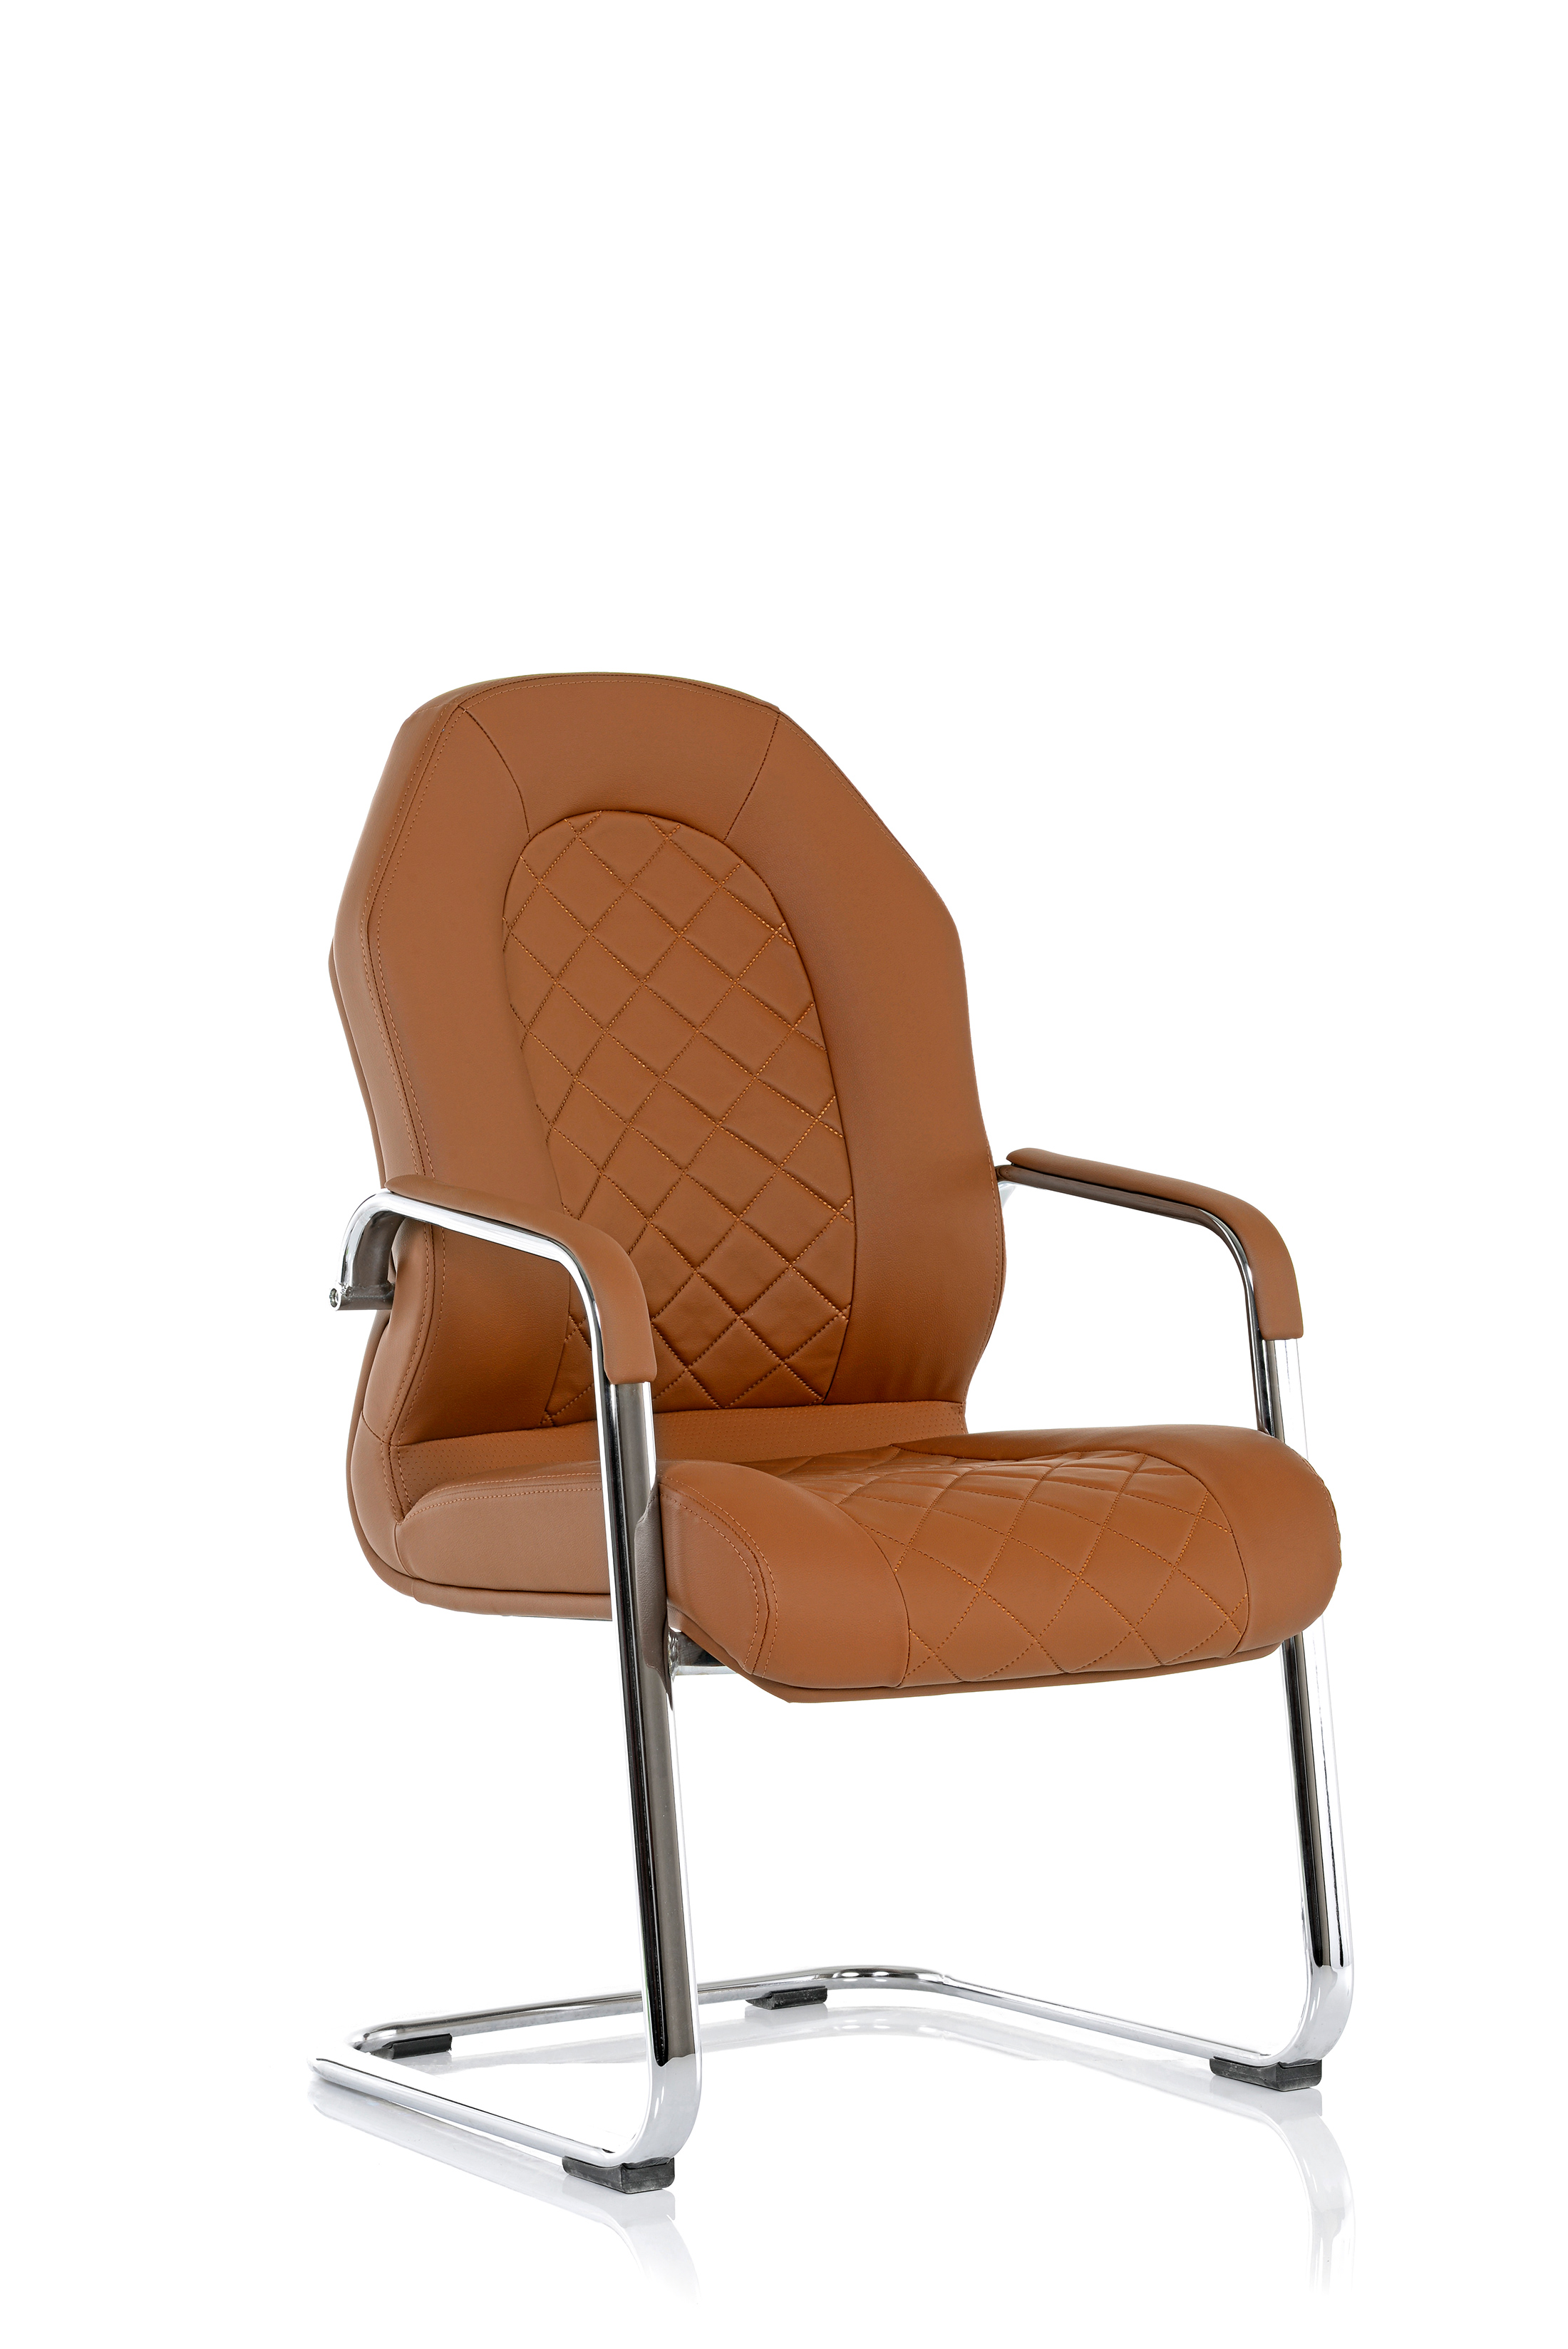 FORTE 300C VISITOR CHAIR